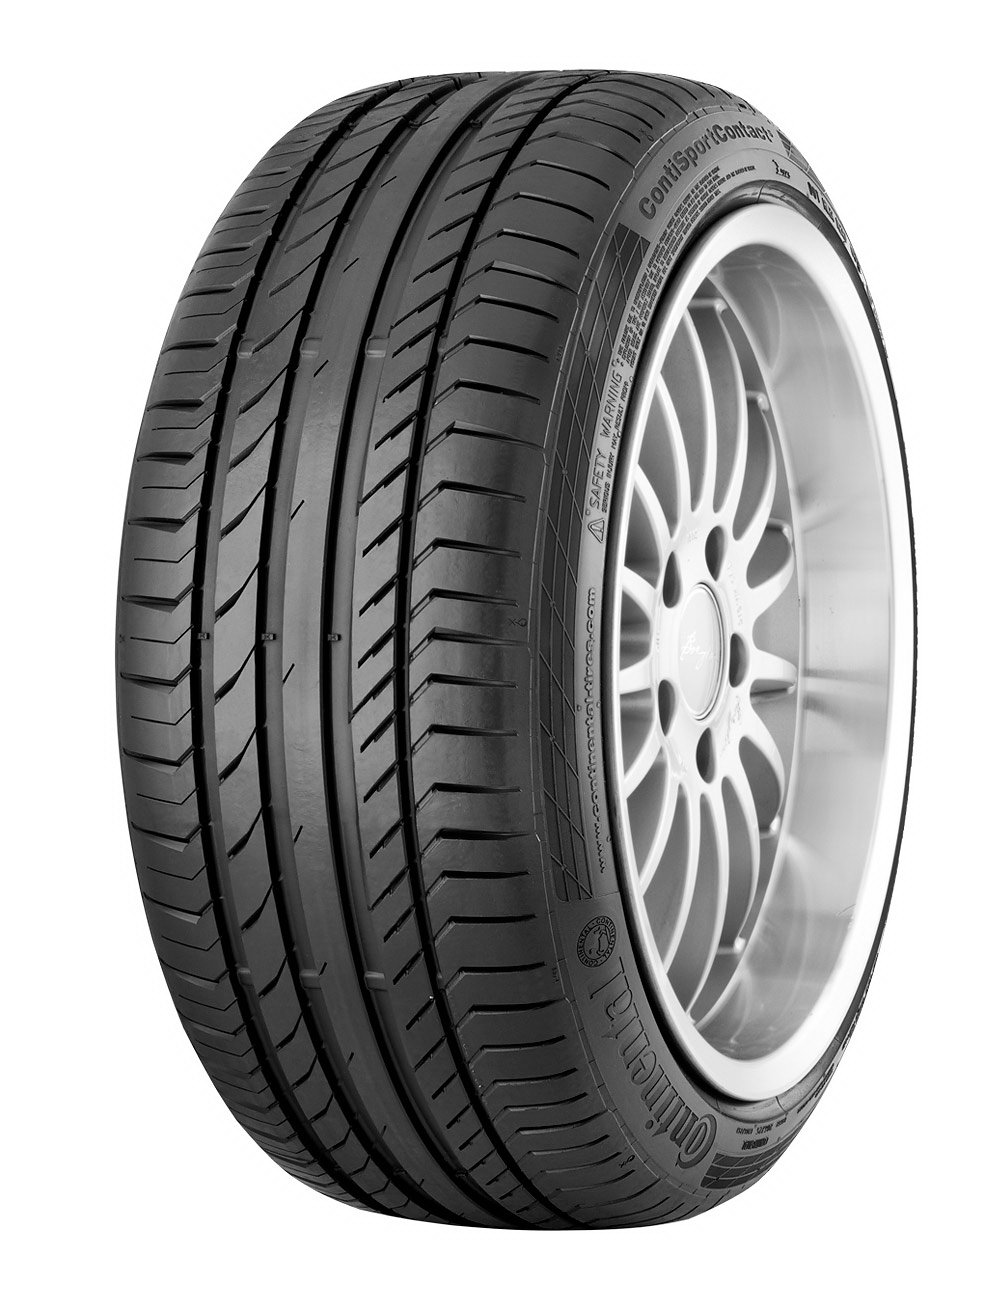 Anvelope vara CONTINENTAL SPORT CONTACT 5 235/50 R17 96W